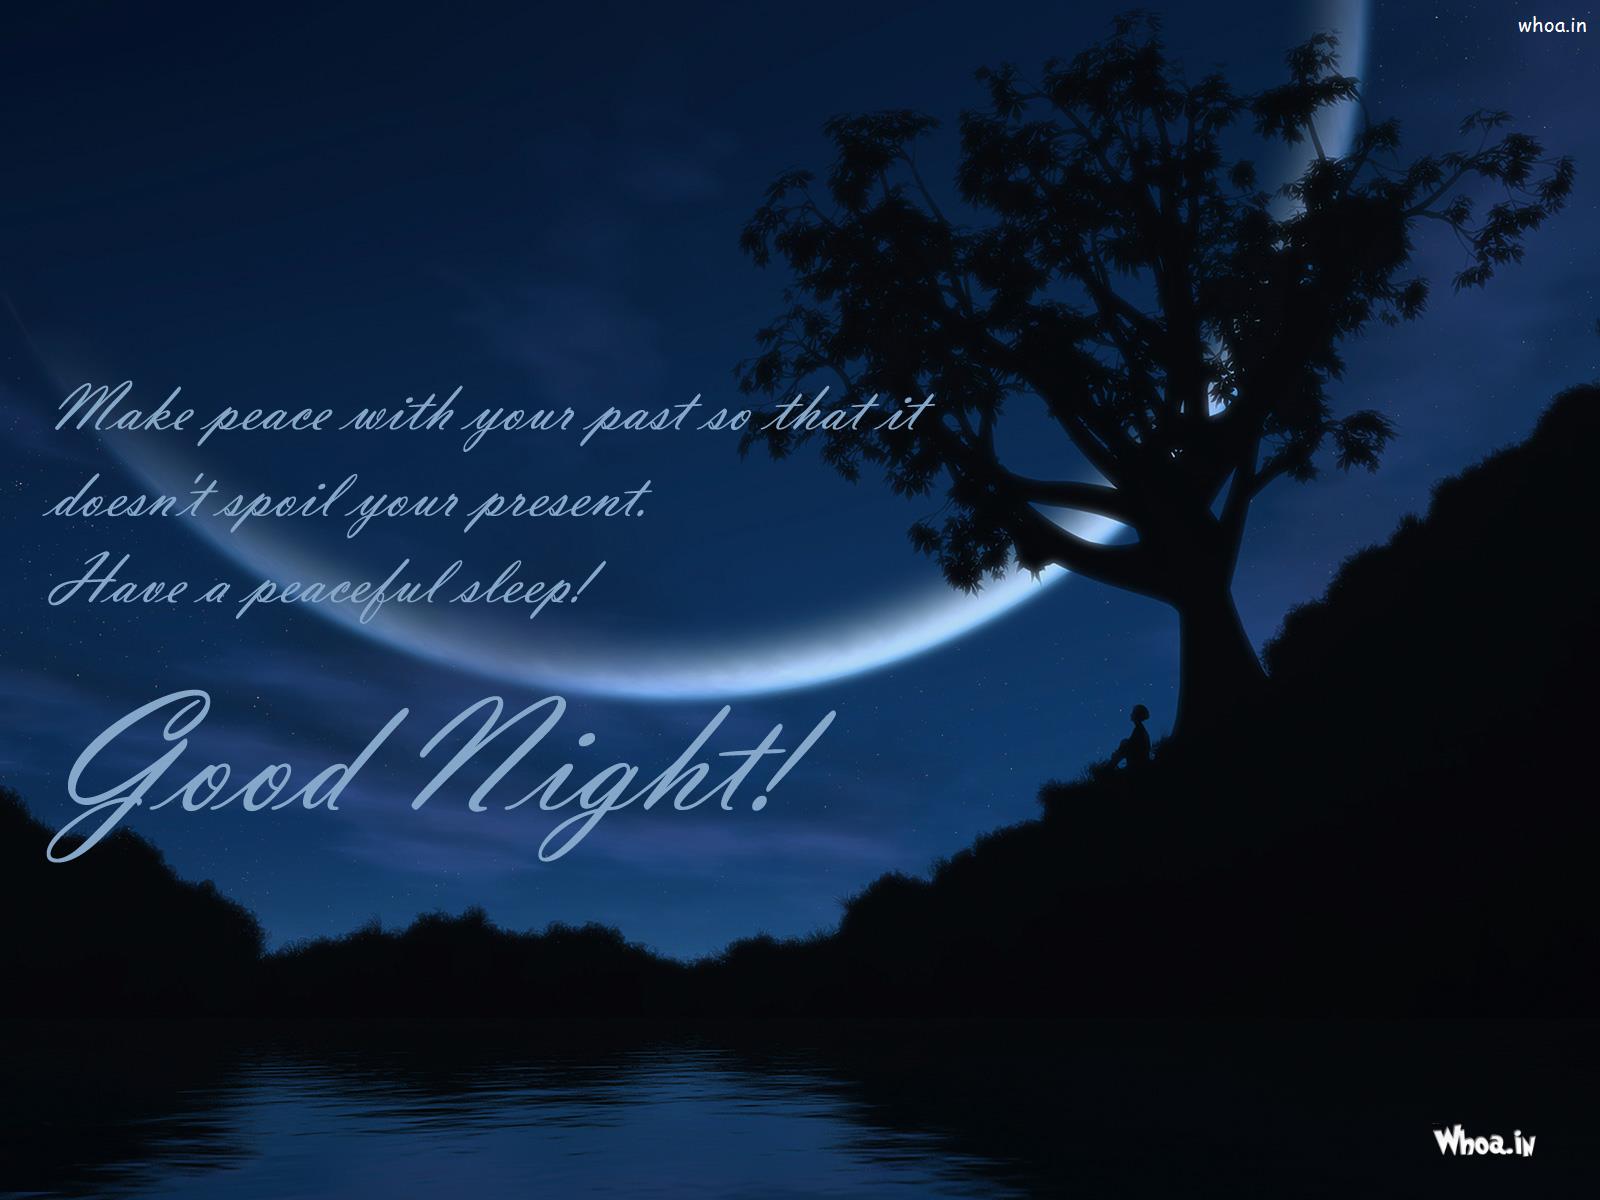 Good Night Thoughts With Blue Night HD Wallpaper